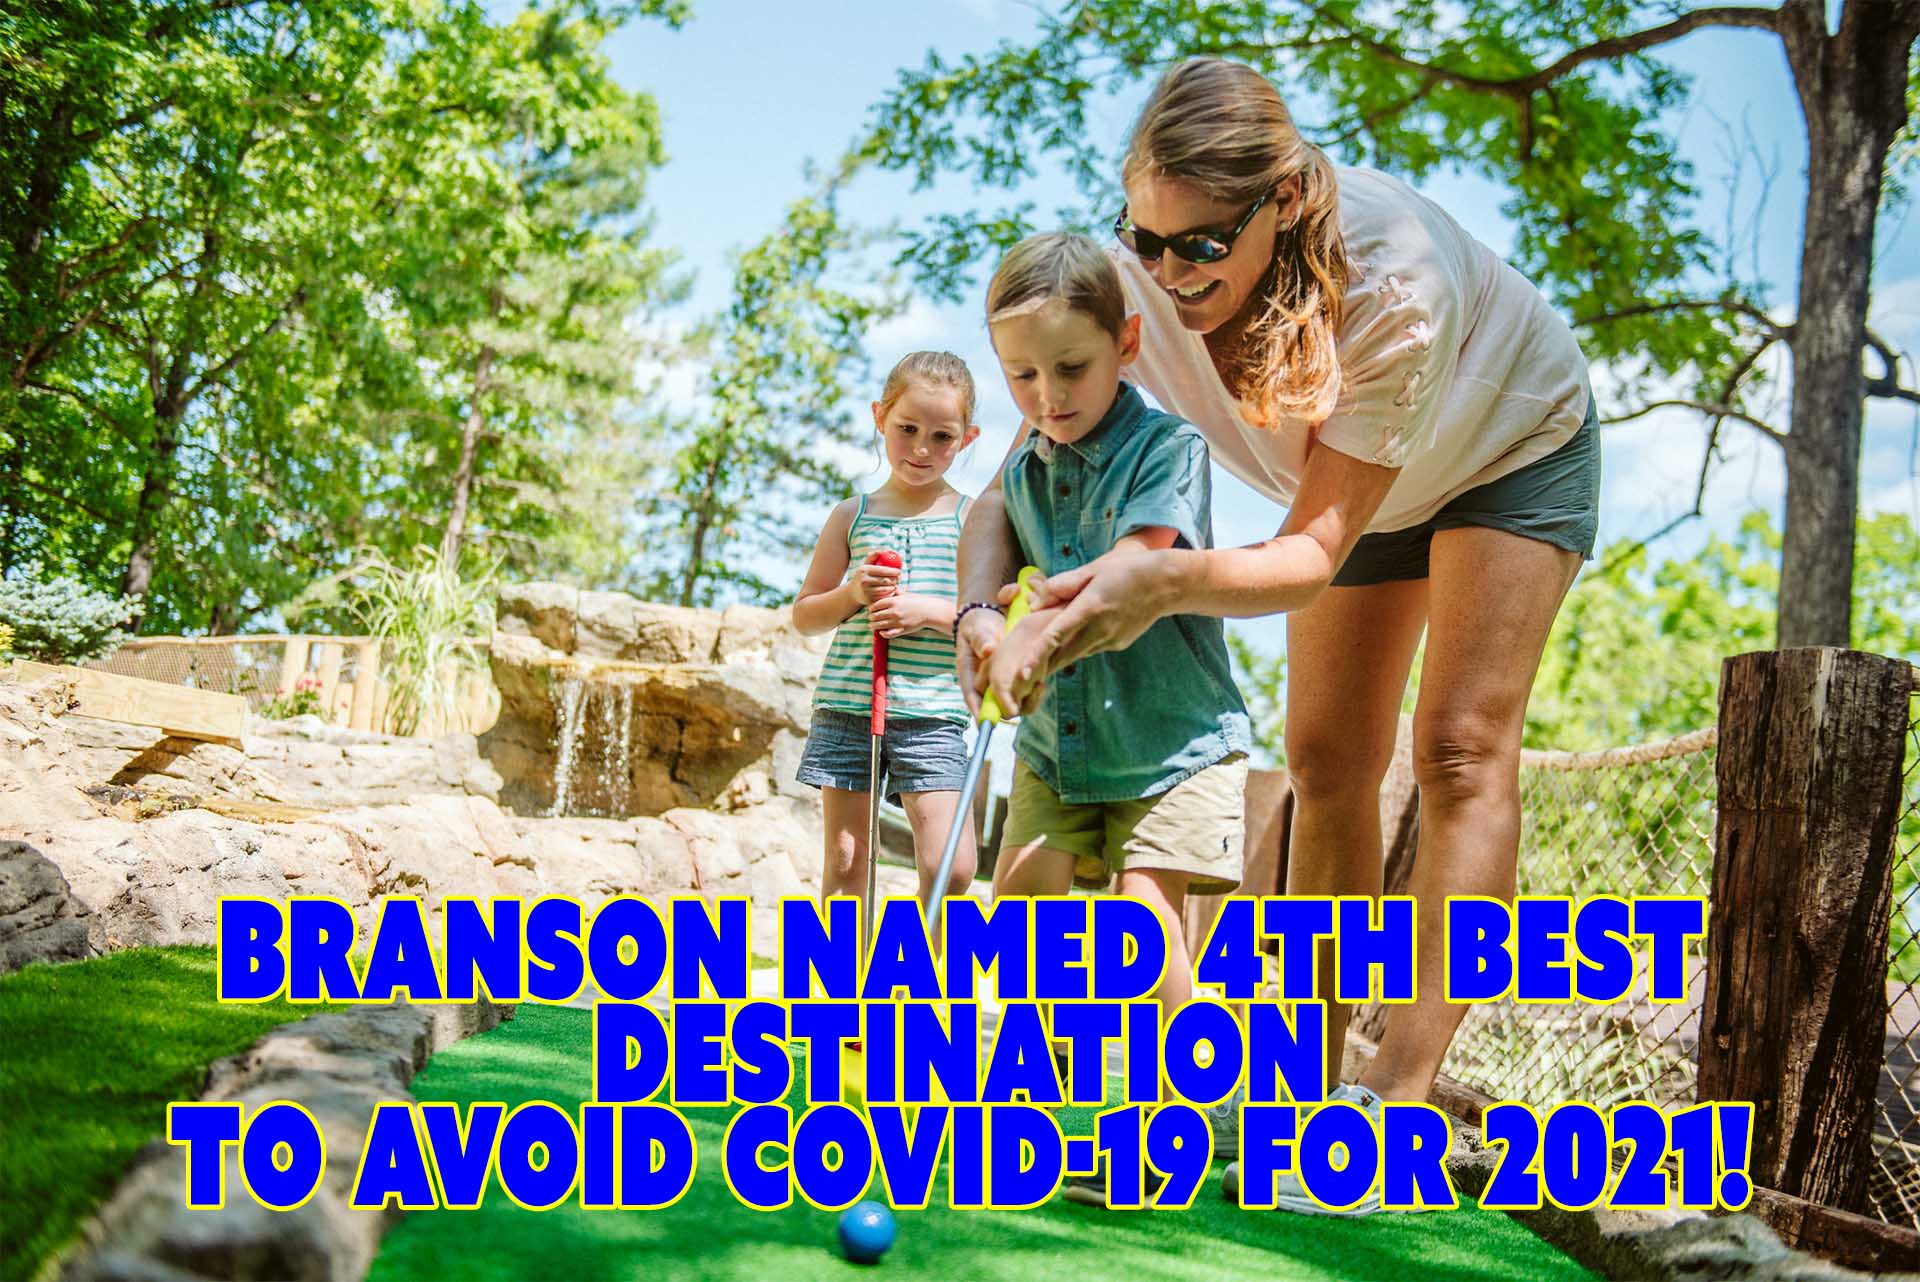 Branson named Number 4 American Destination to Avoid COVID Illness